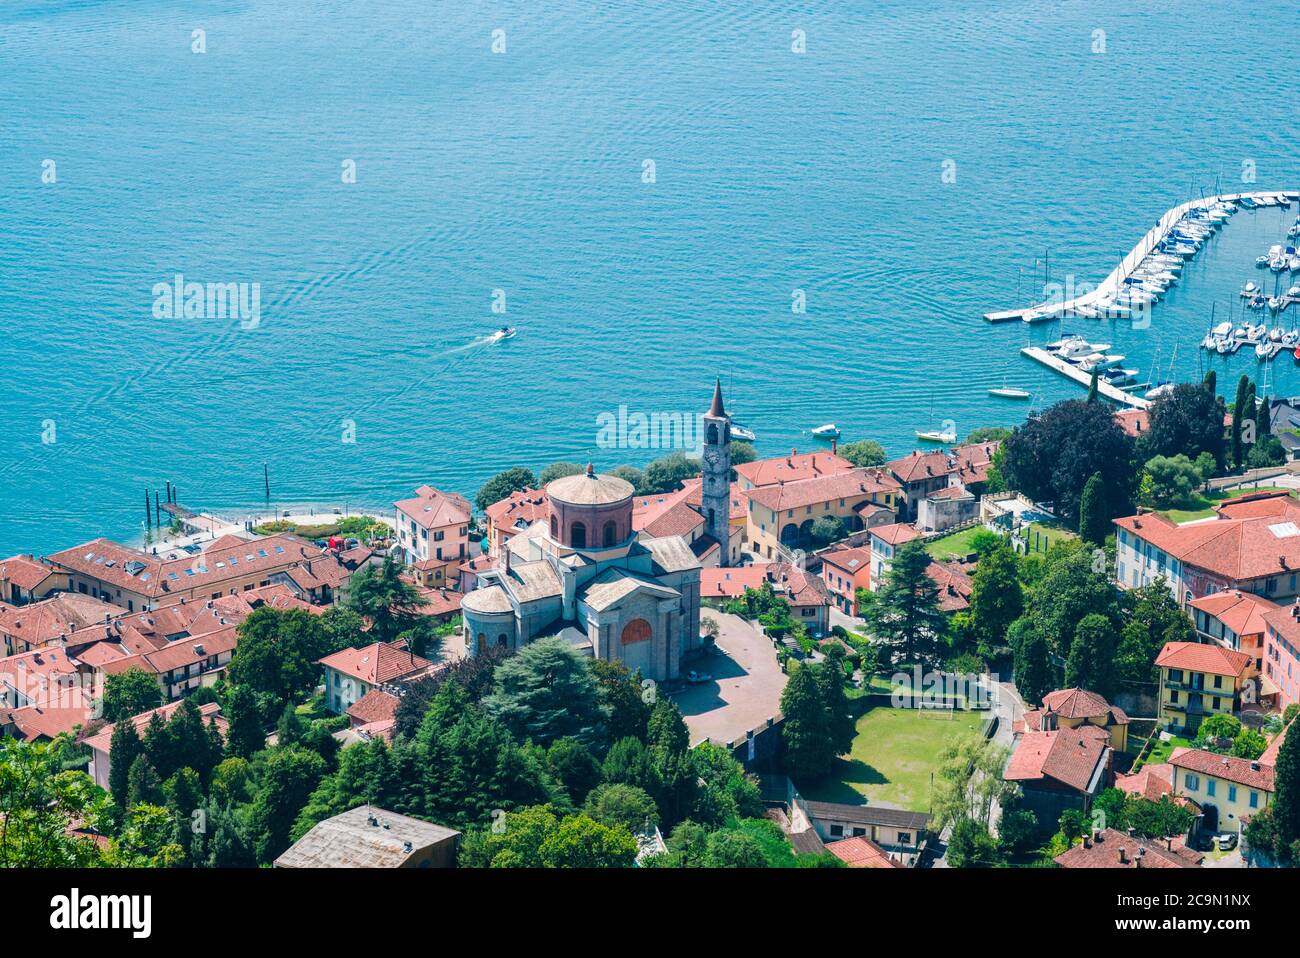 The city of Laveno, seen from above Stock Photo